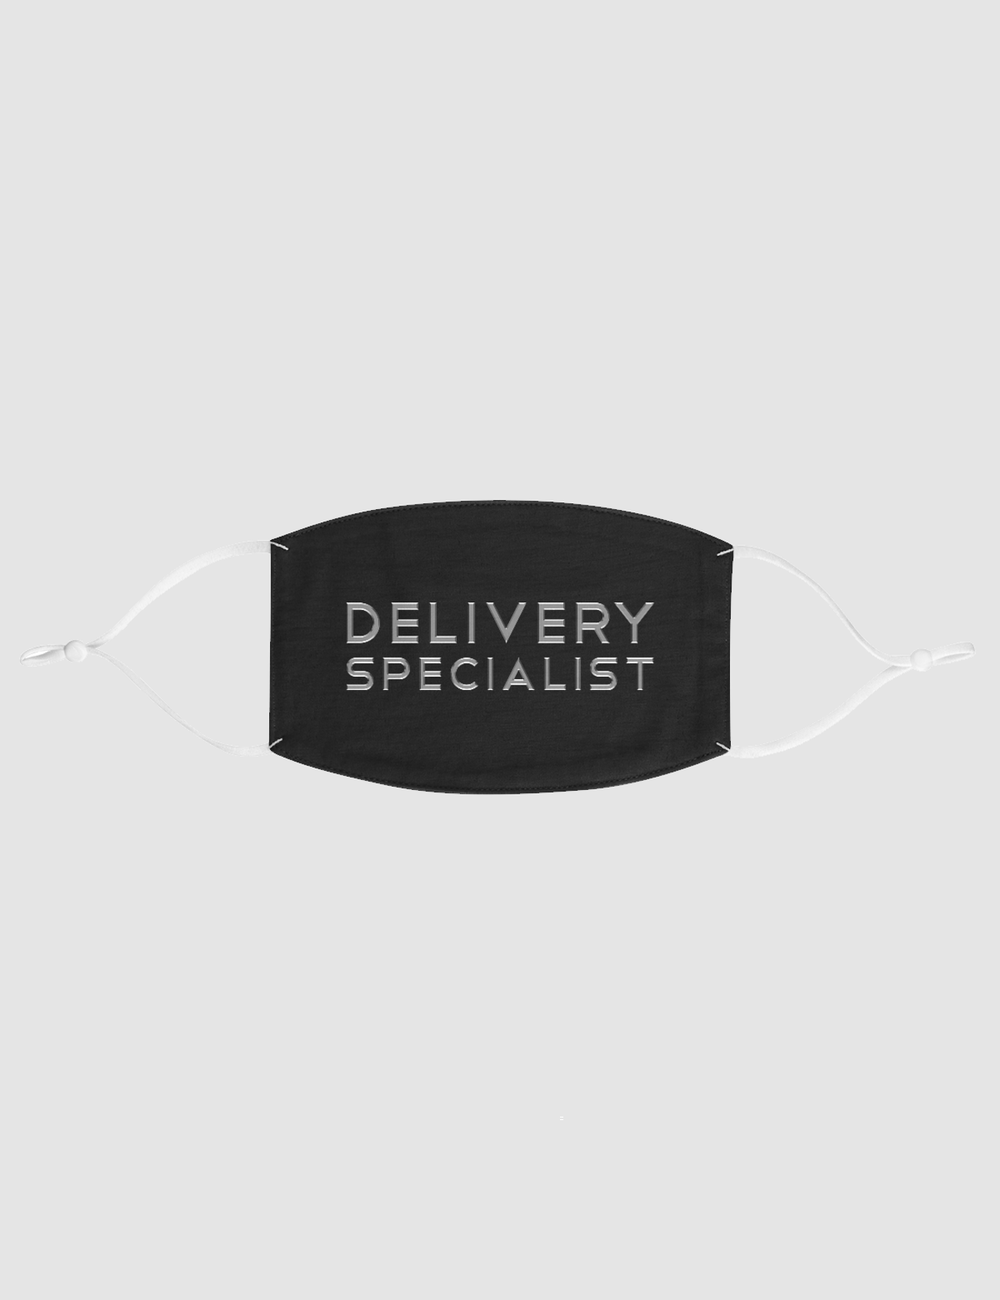 Delivery Specialist | Two-Layer Polyester Fabric Face Mask OniTakai